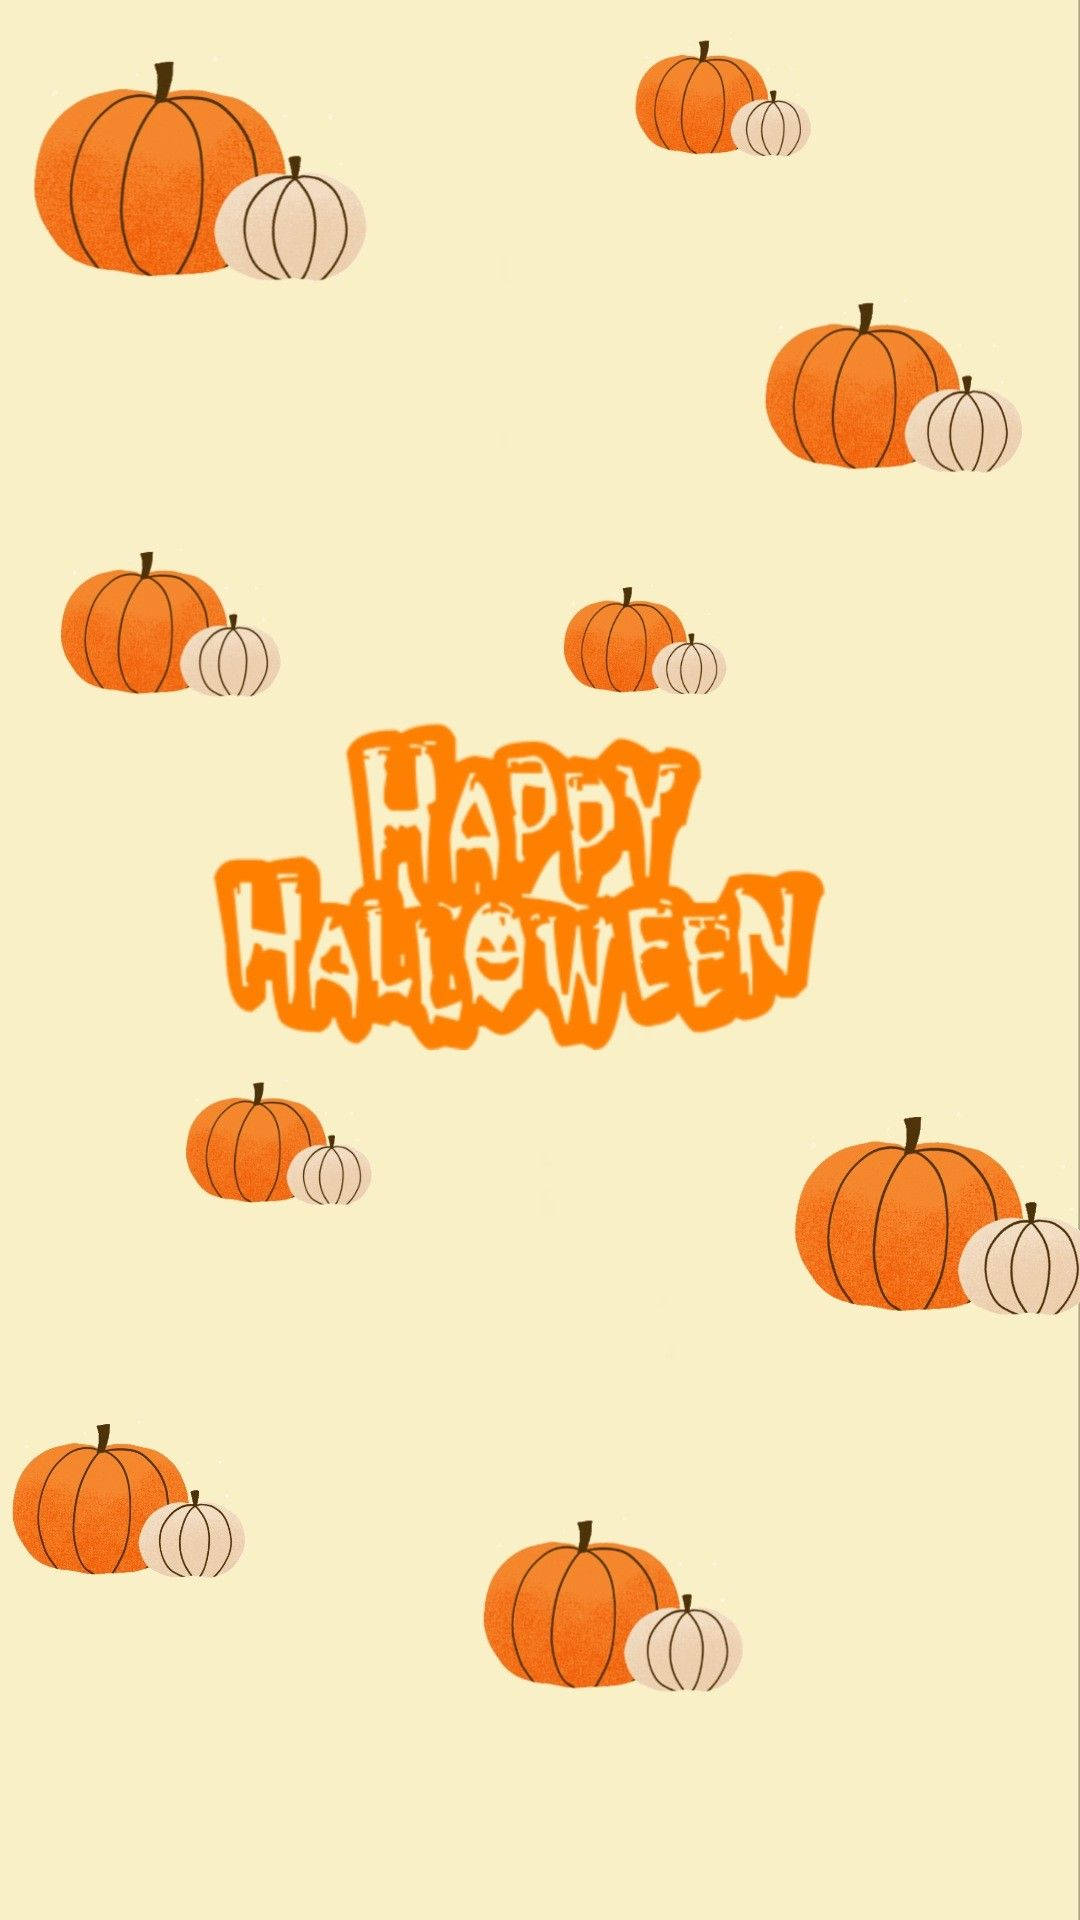 Get Ready For A Spooky And Fun Happy Halloween!